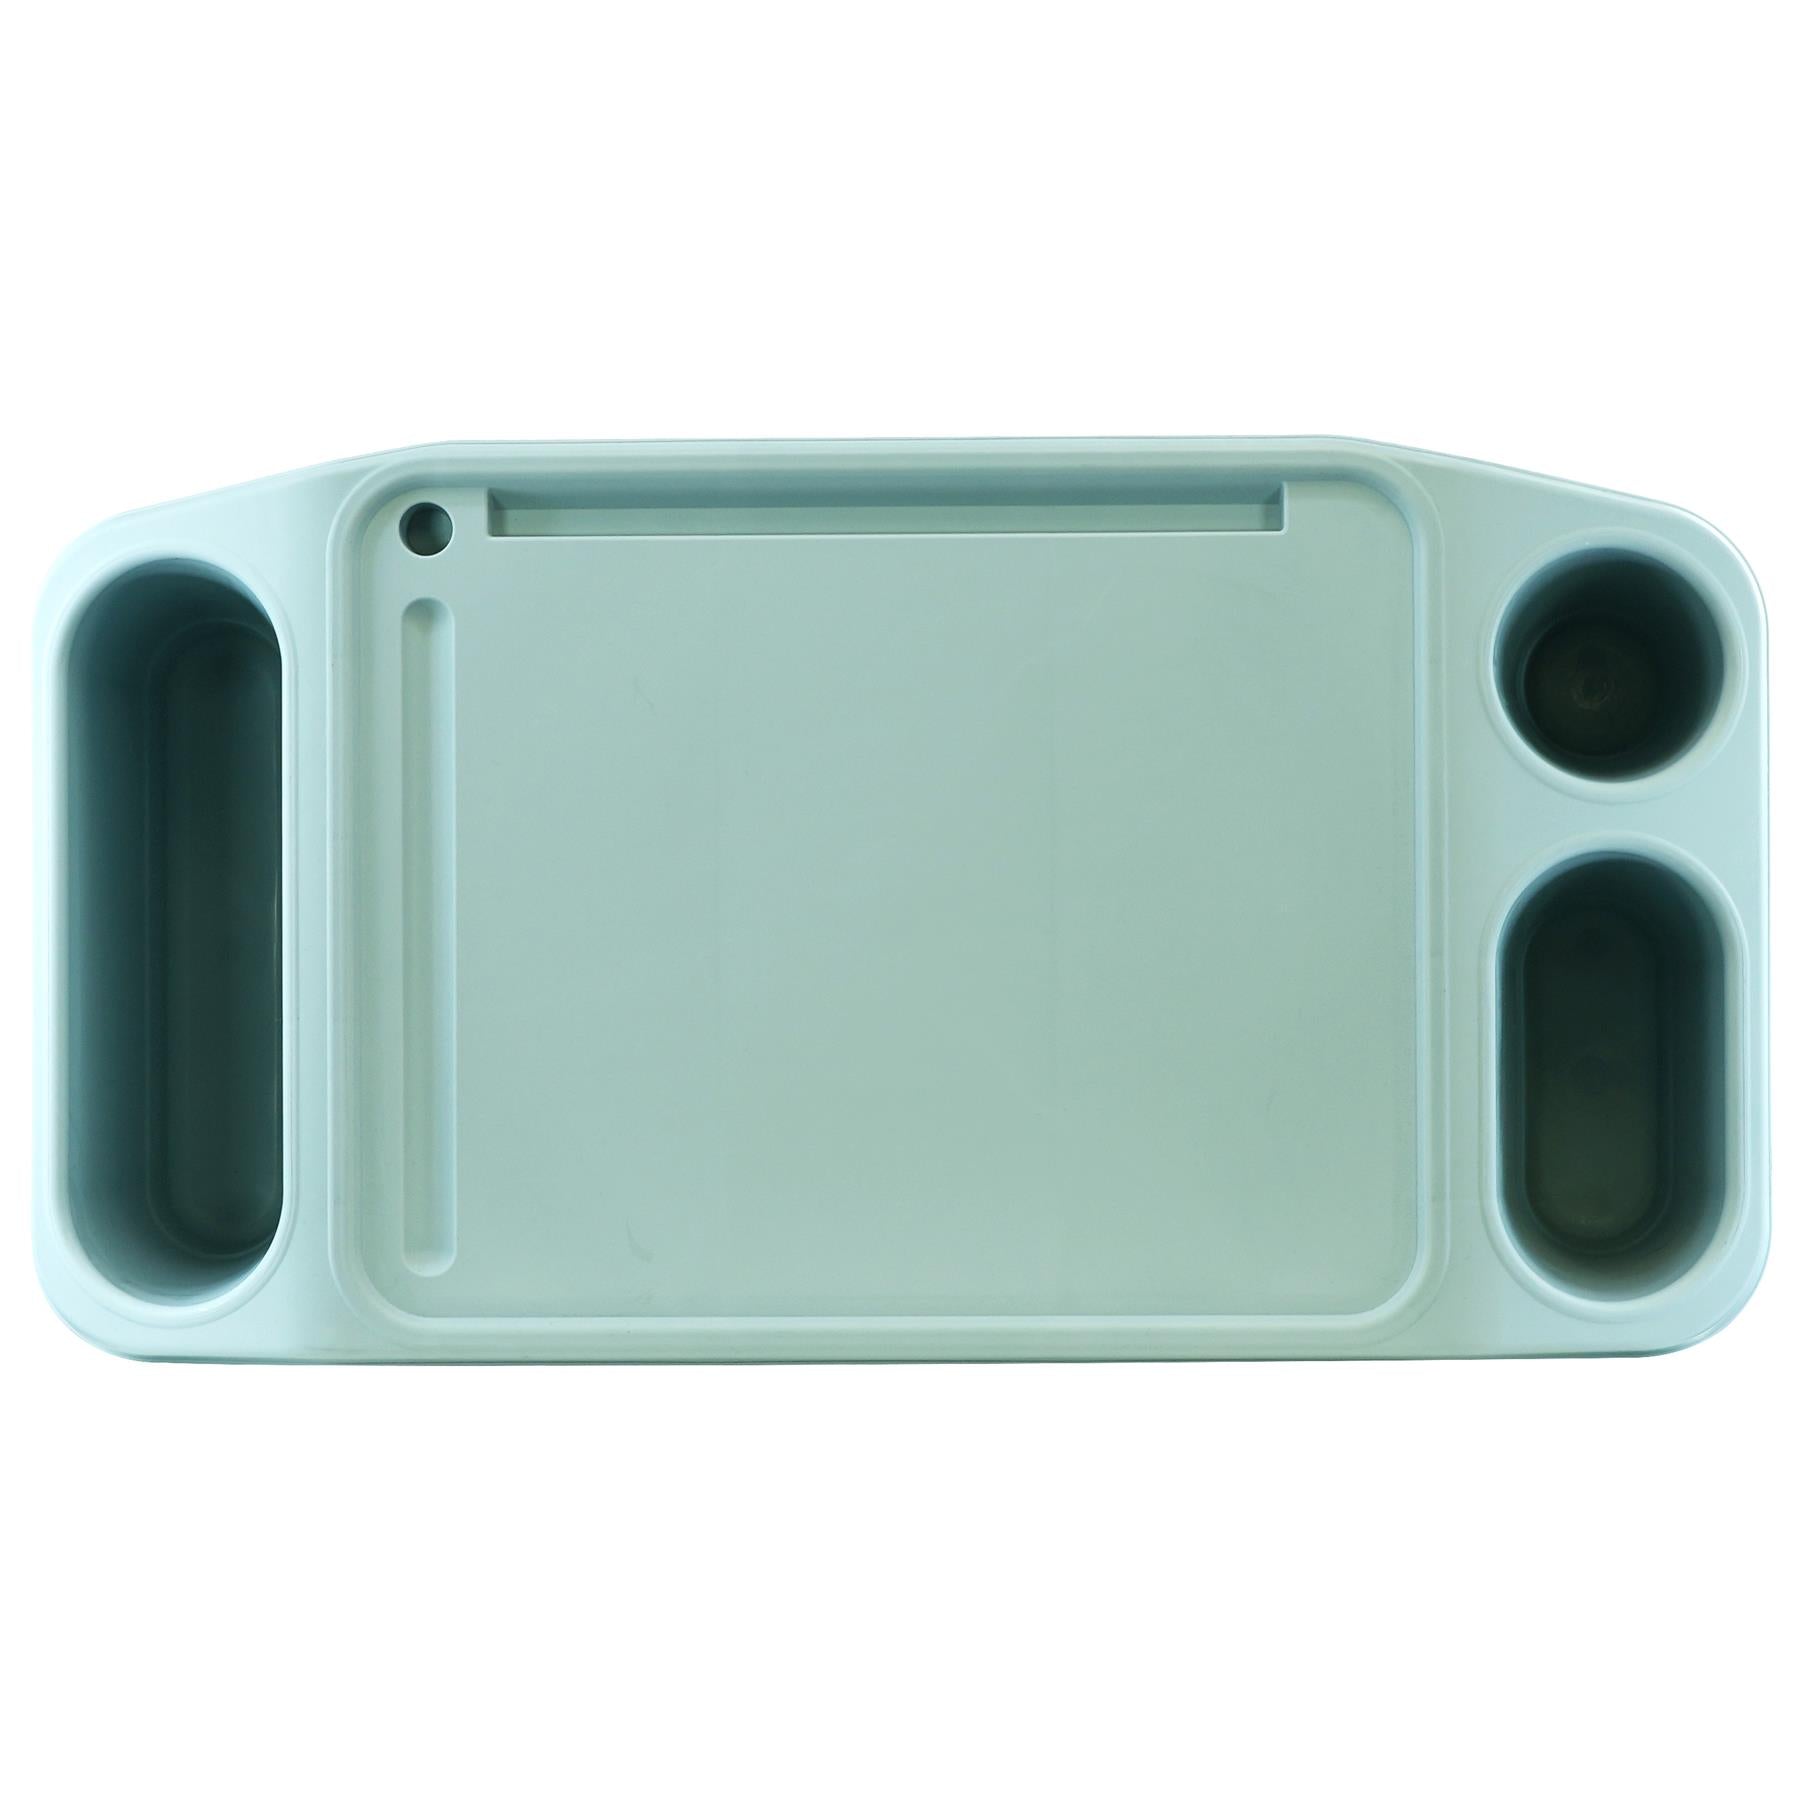 Portable Blue Bed Tray & Drink Holder by Geezy - The Magic Toy Shop